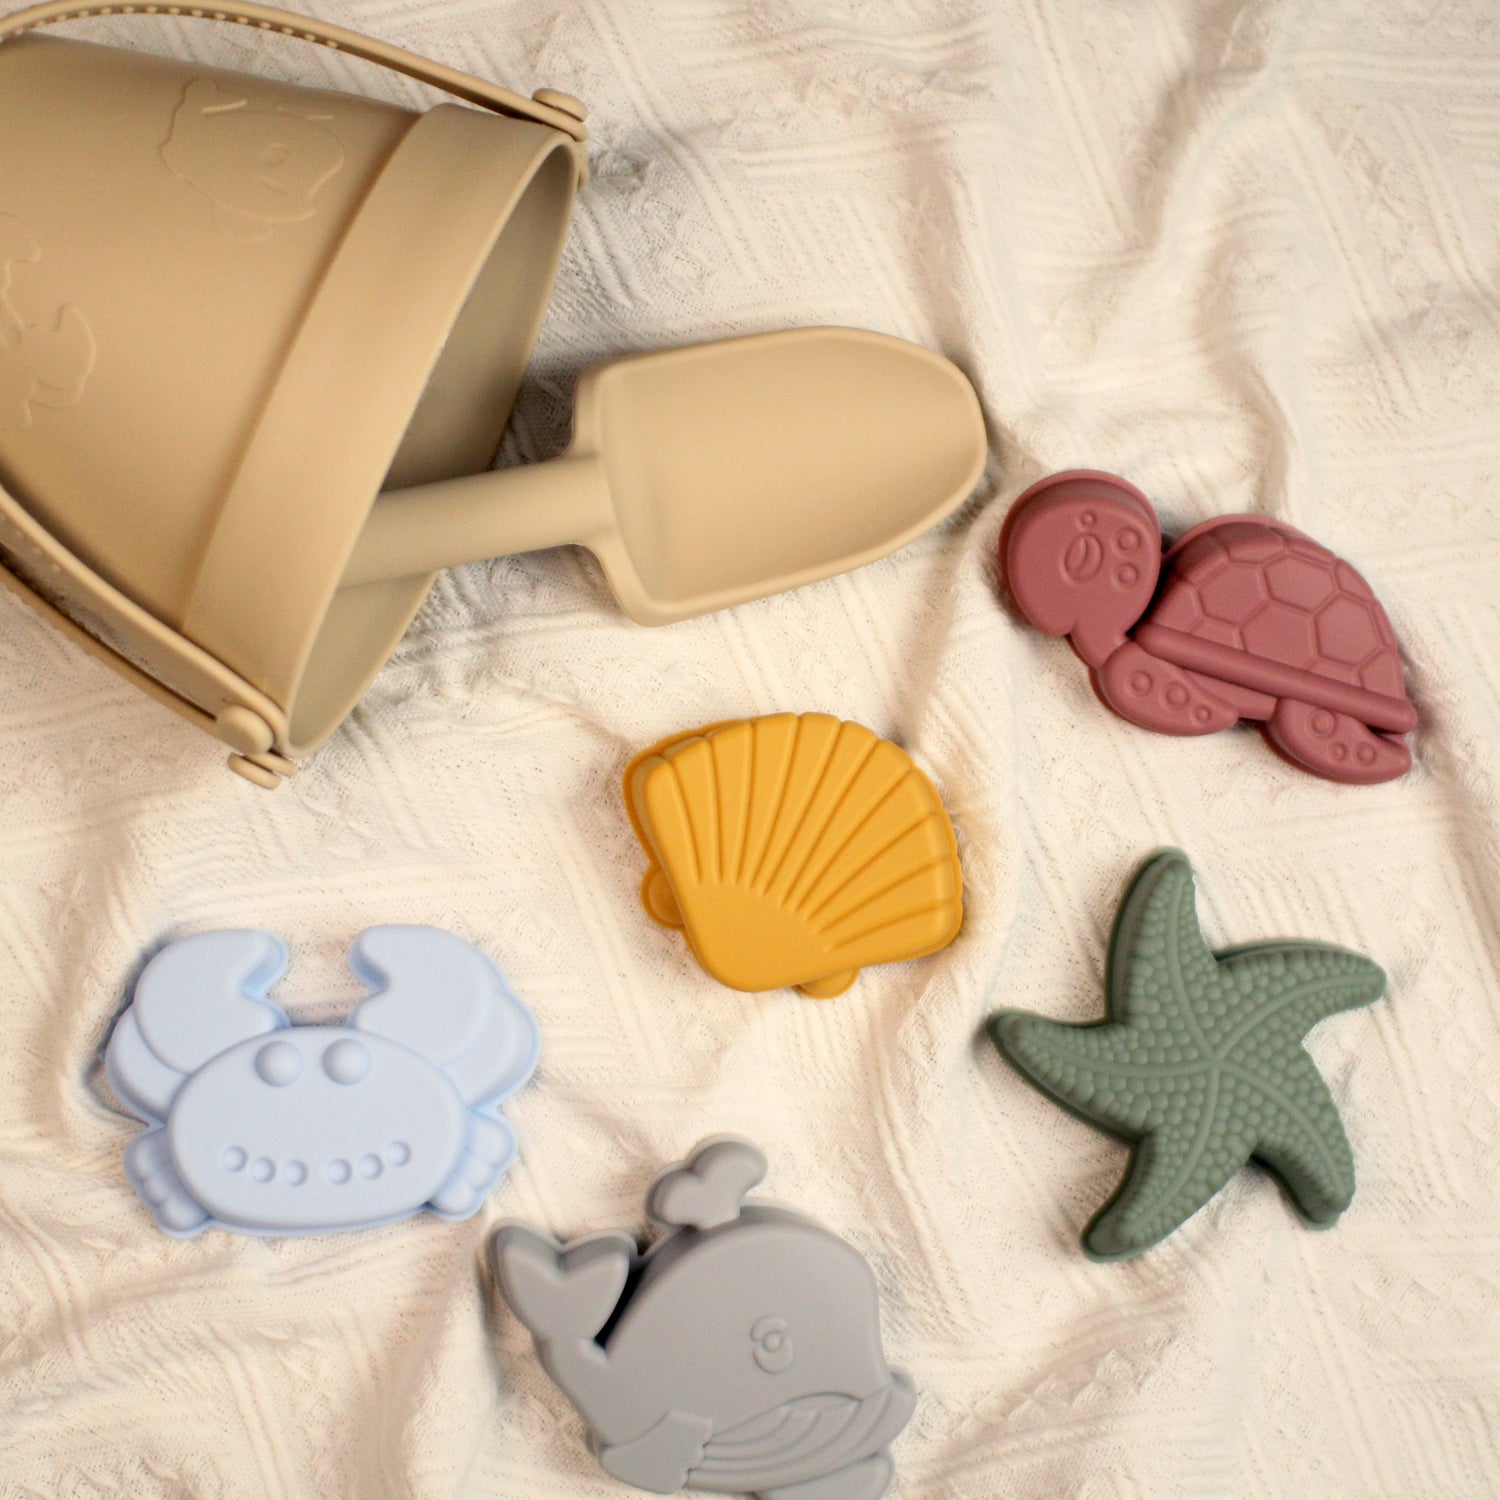 Beige silicone beach play set with bucket and colour sea creatures silicone molds, sand castles